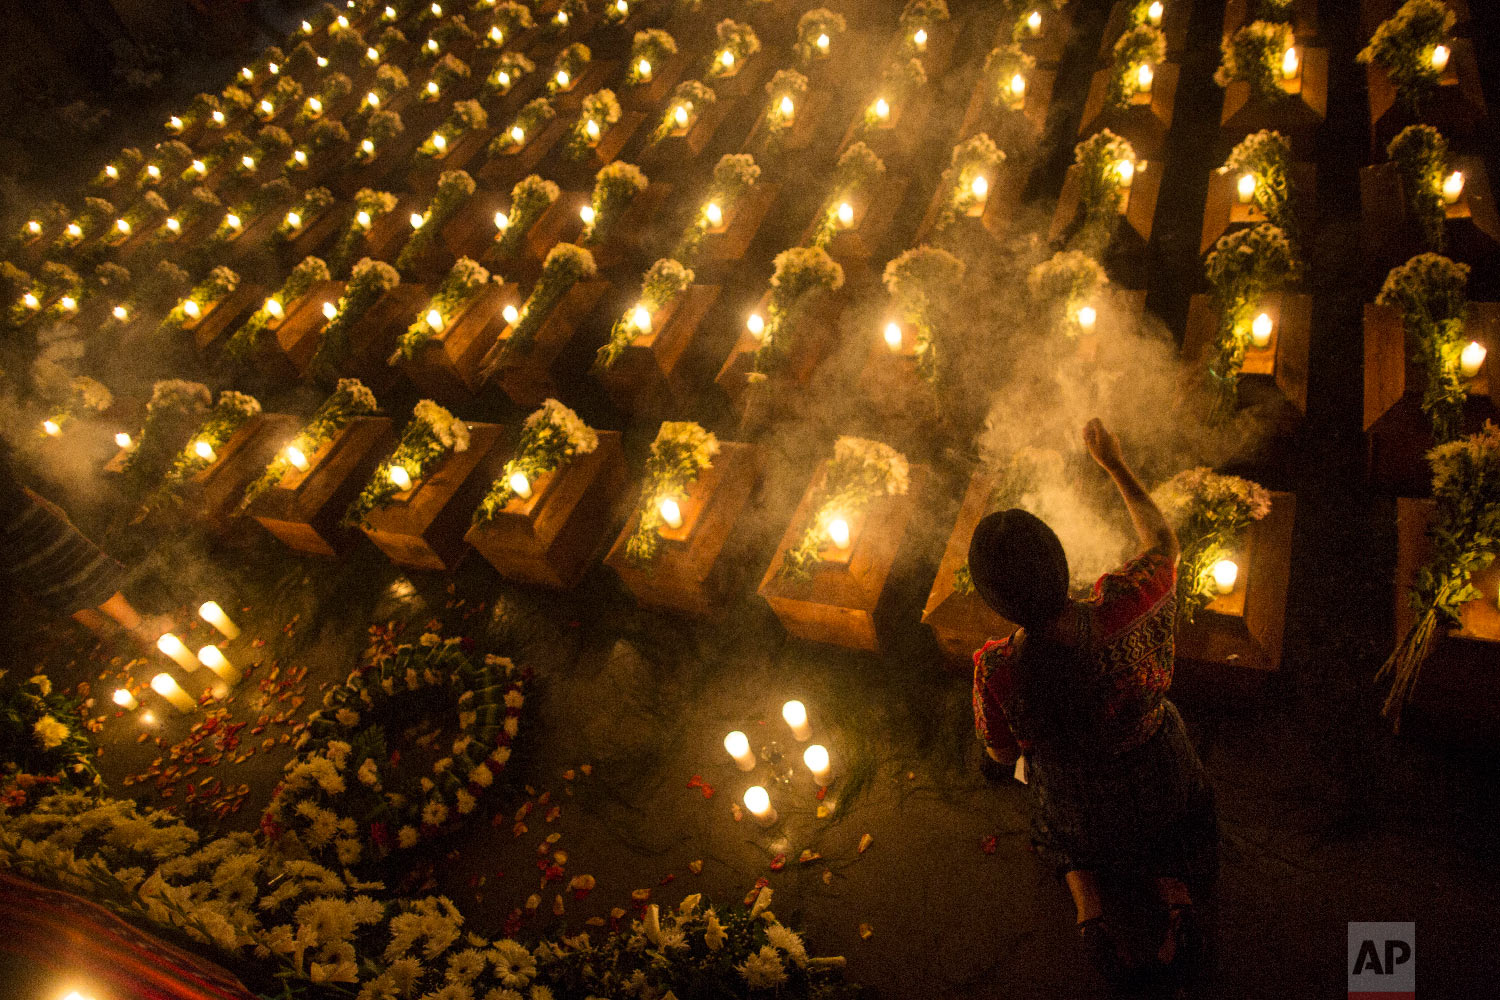  A woman spreads incense over coffins holding the remains of 172 unidentified people who were discovered buried at what was once a military camp in San Juan Comalapa, Guatemala, on June 20, 2018, the day before their formal burial at the same site wh